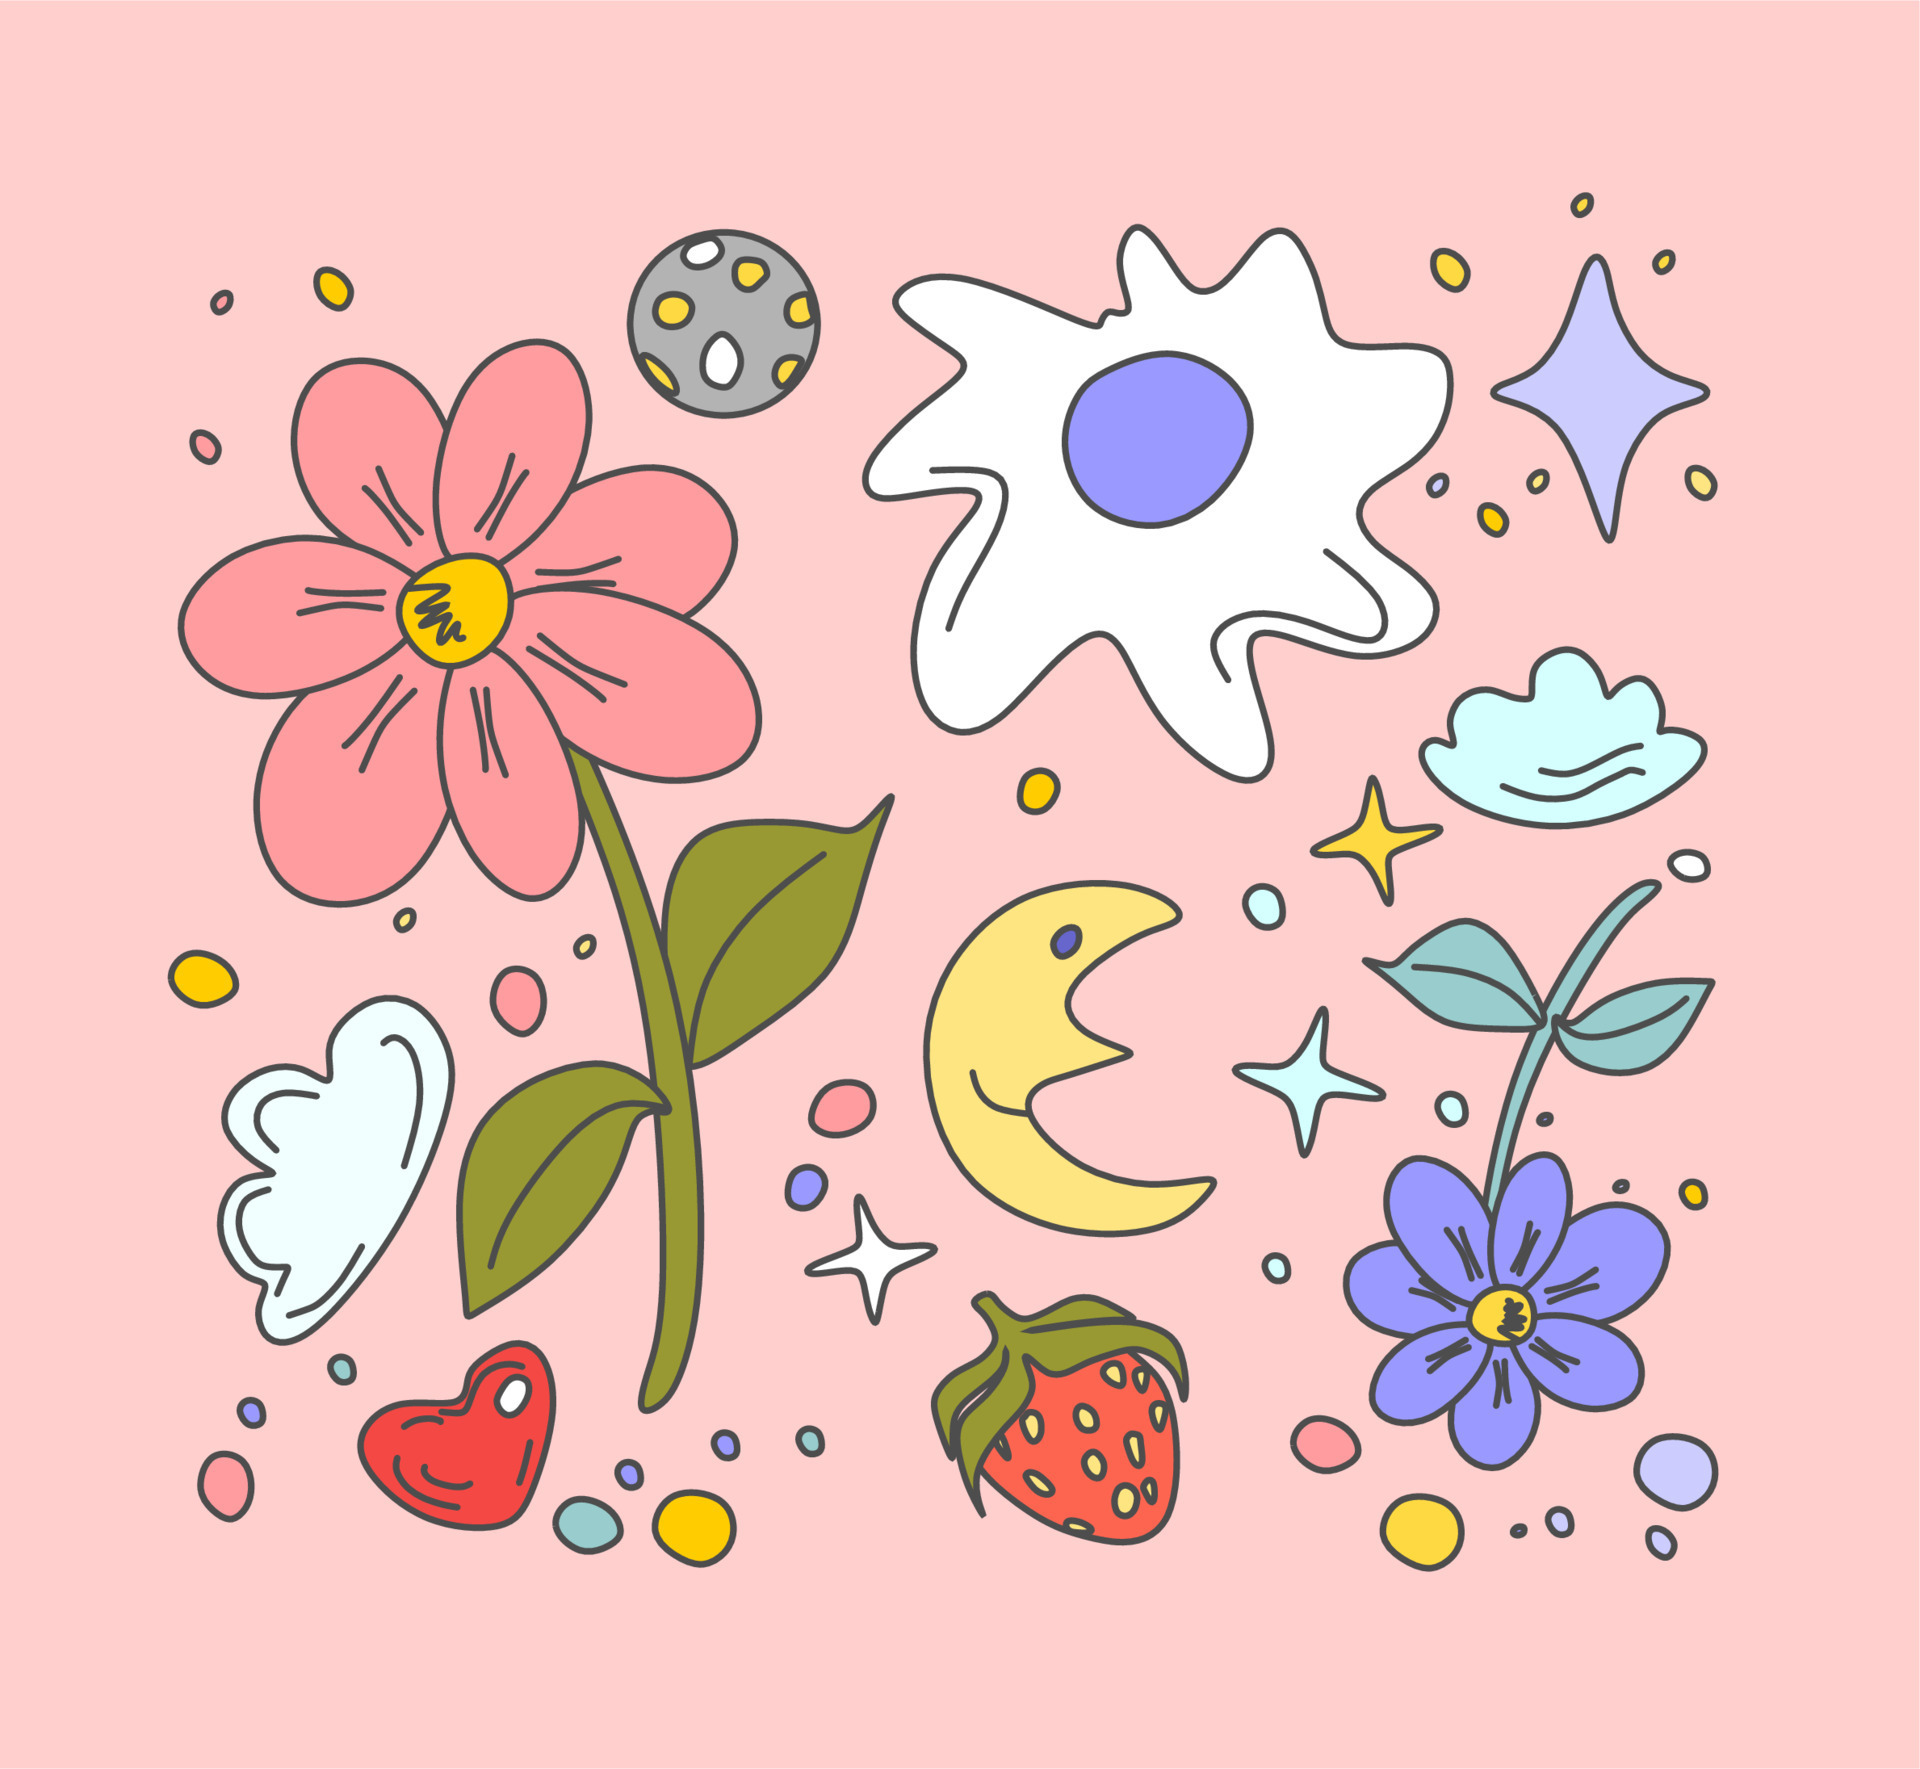 The mood is romantic, aesthetic. Flowers, moons, clouds, crystals